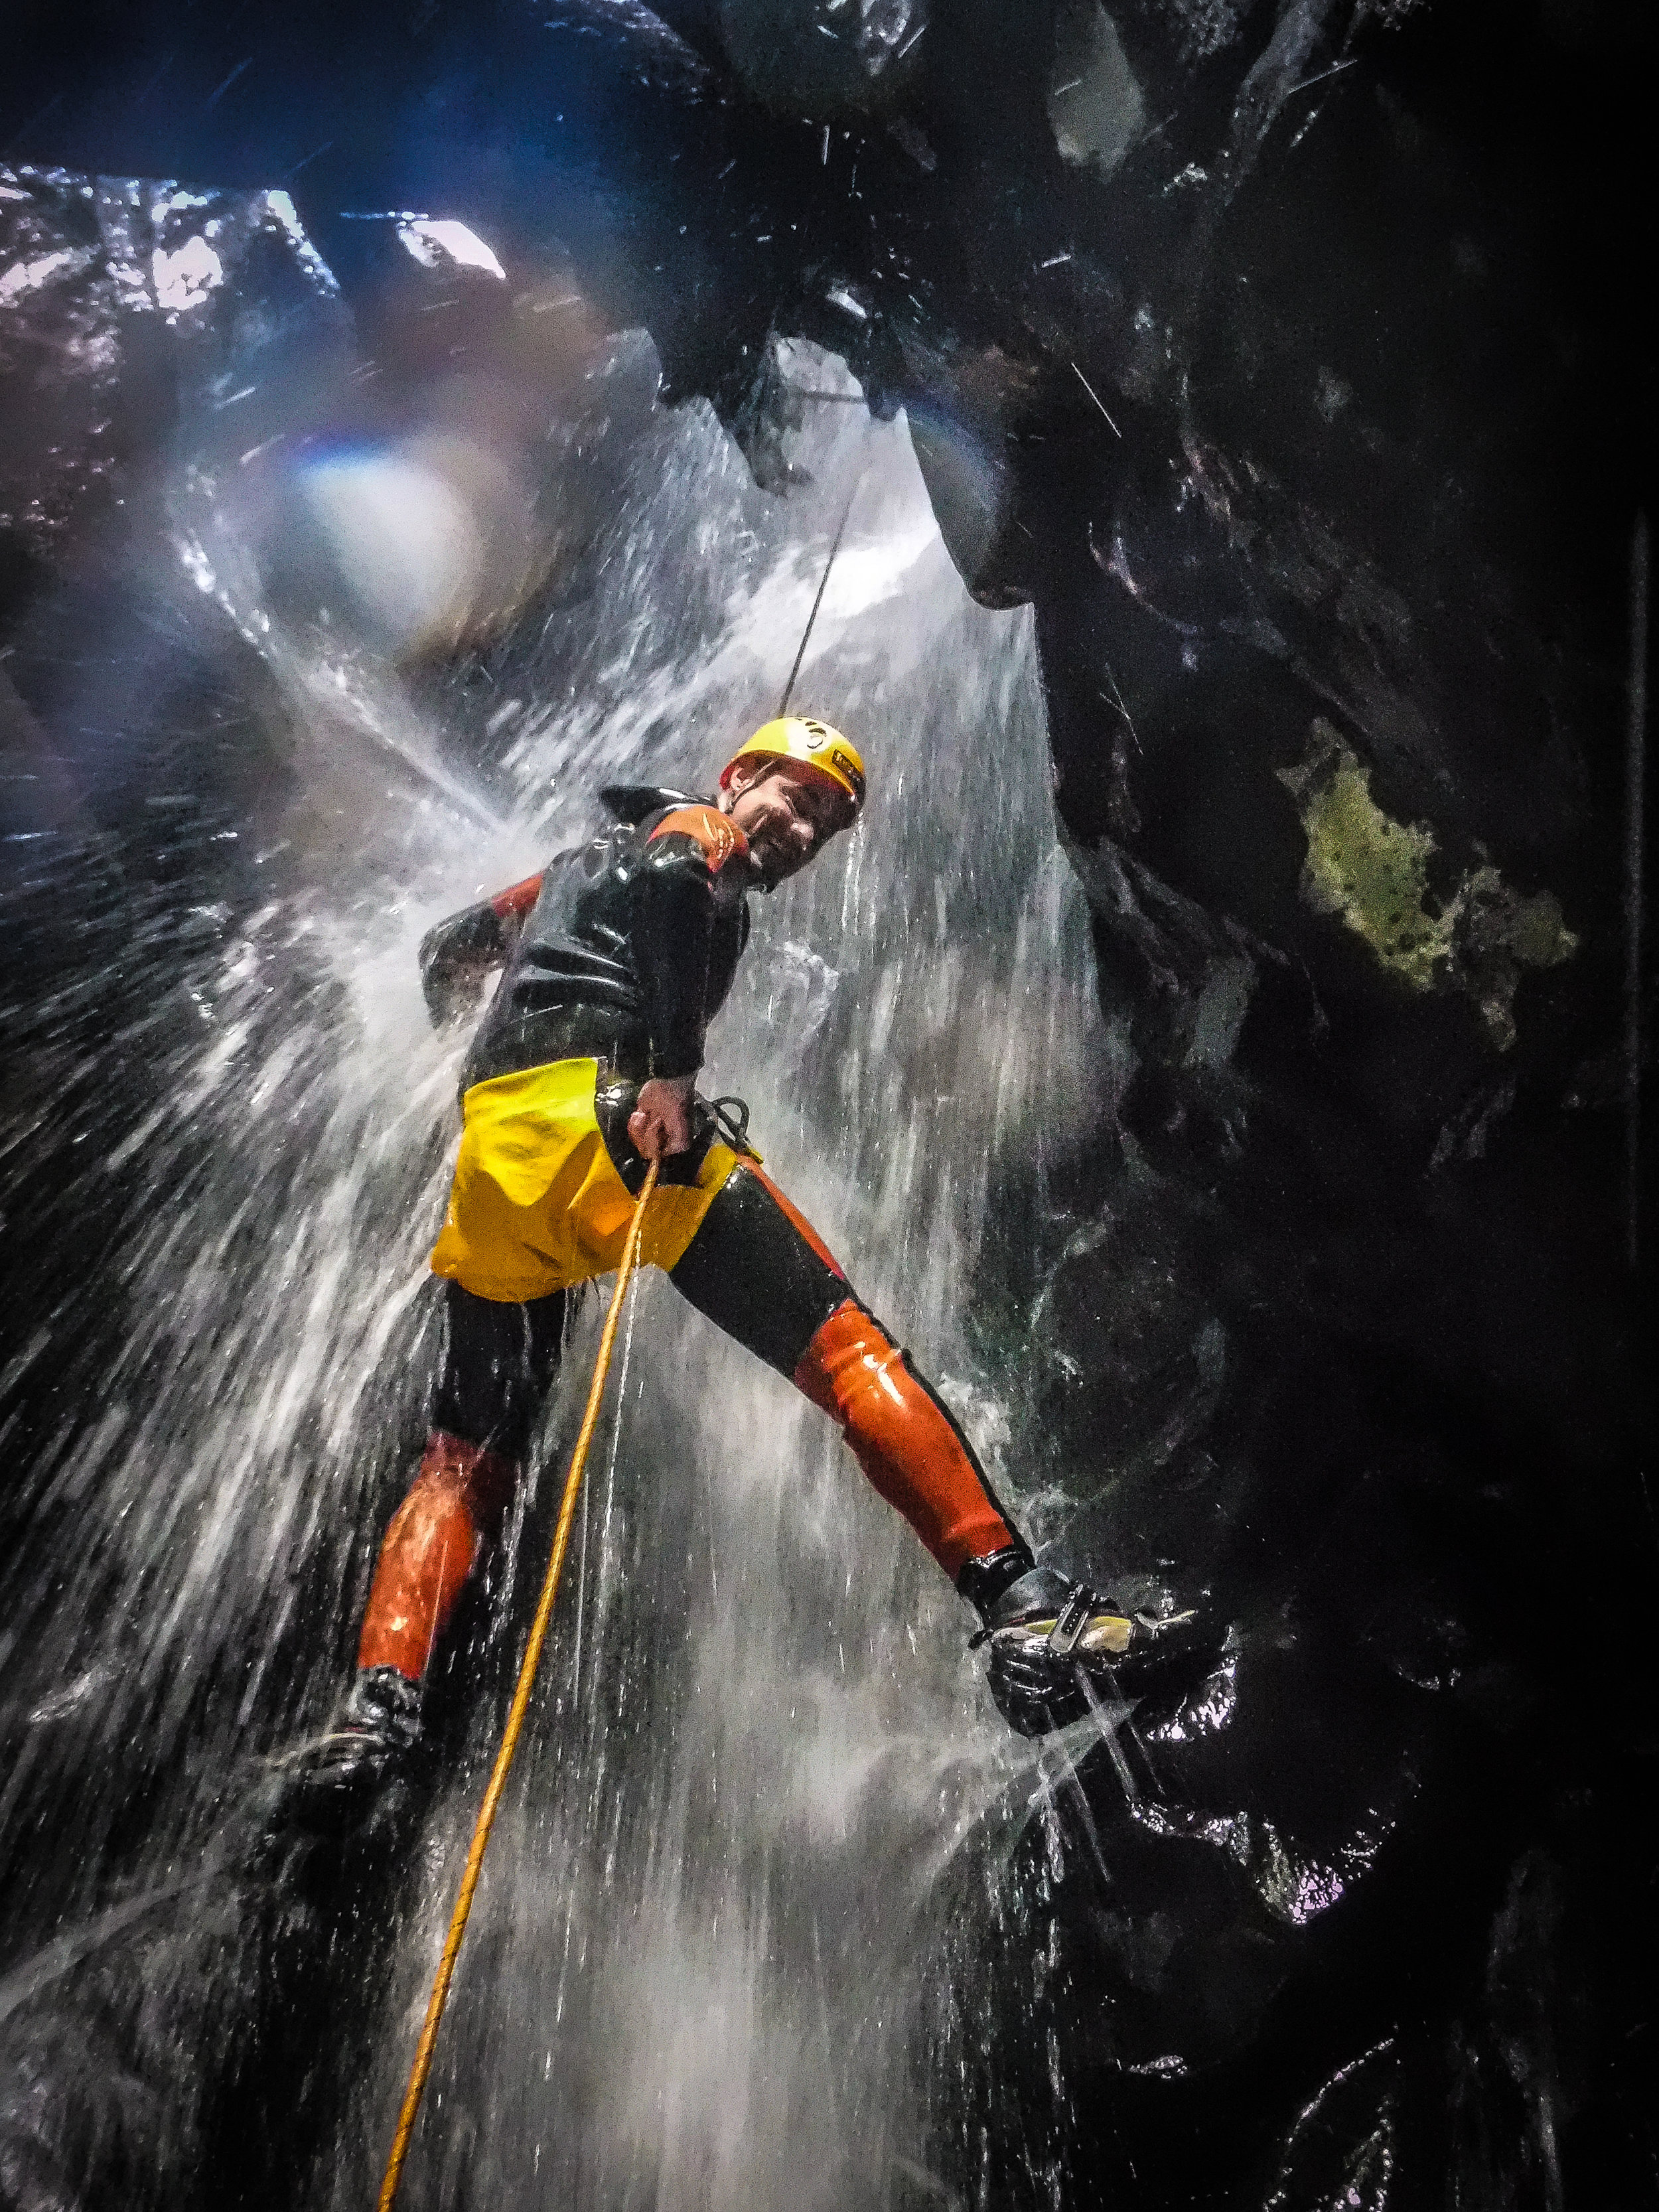 10 best things to do on sao miguel - Canyoning.jpg